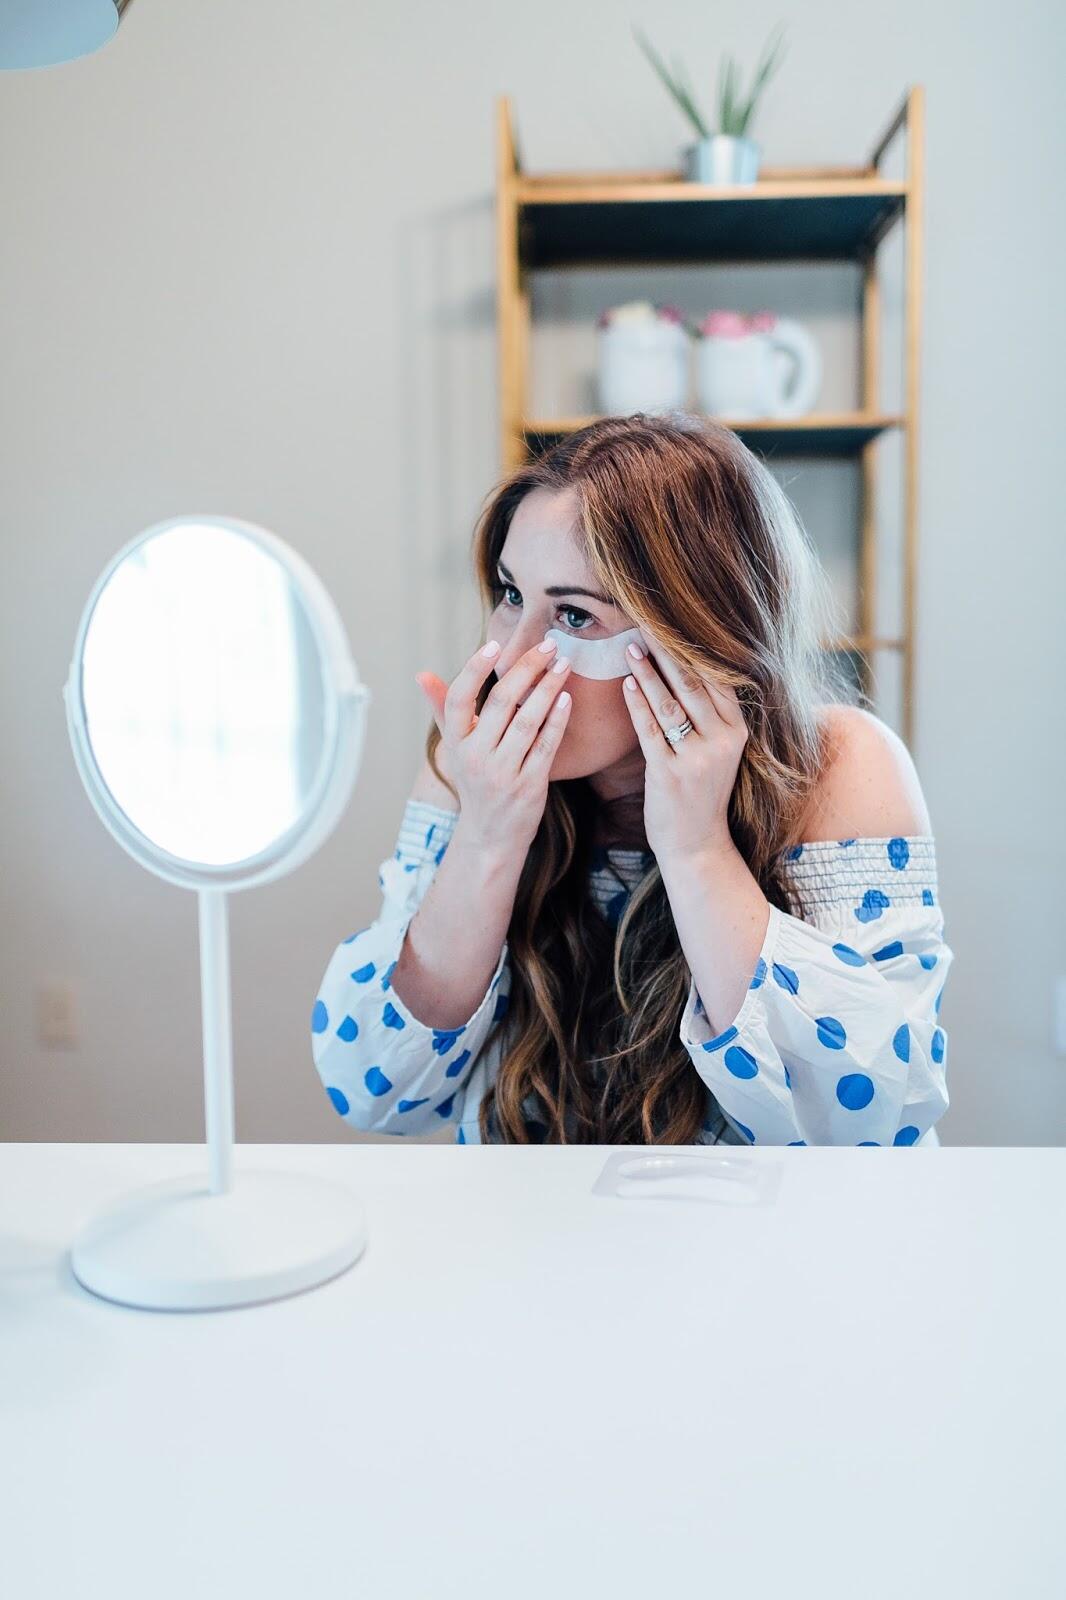 The Eye Mask For Sleeping: The Secrets to Waking up Looking & Feeling Refreshed by fashion blogger Laura from Walking in Memphis in High Heels